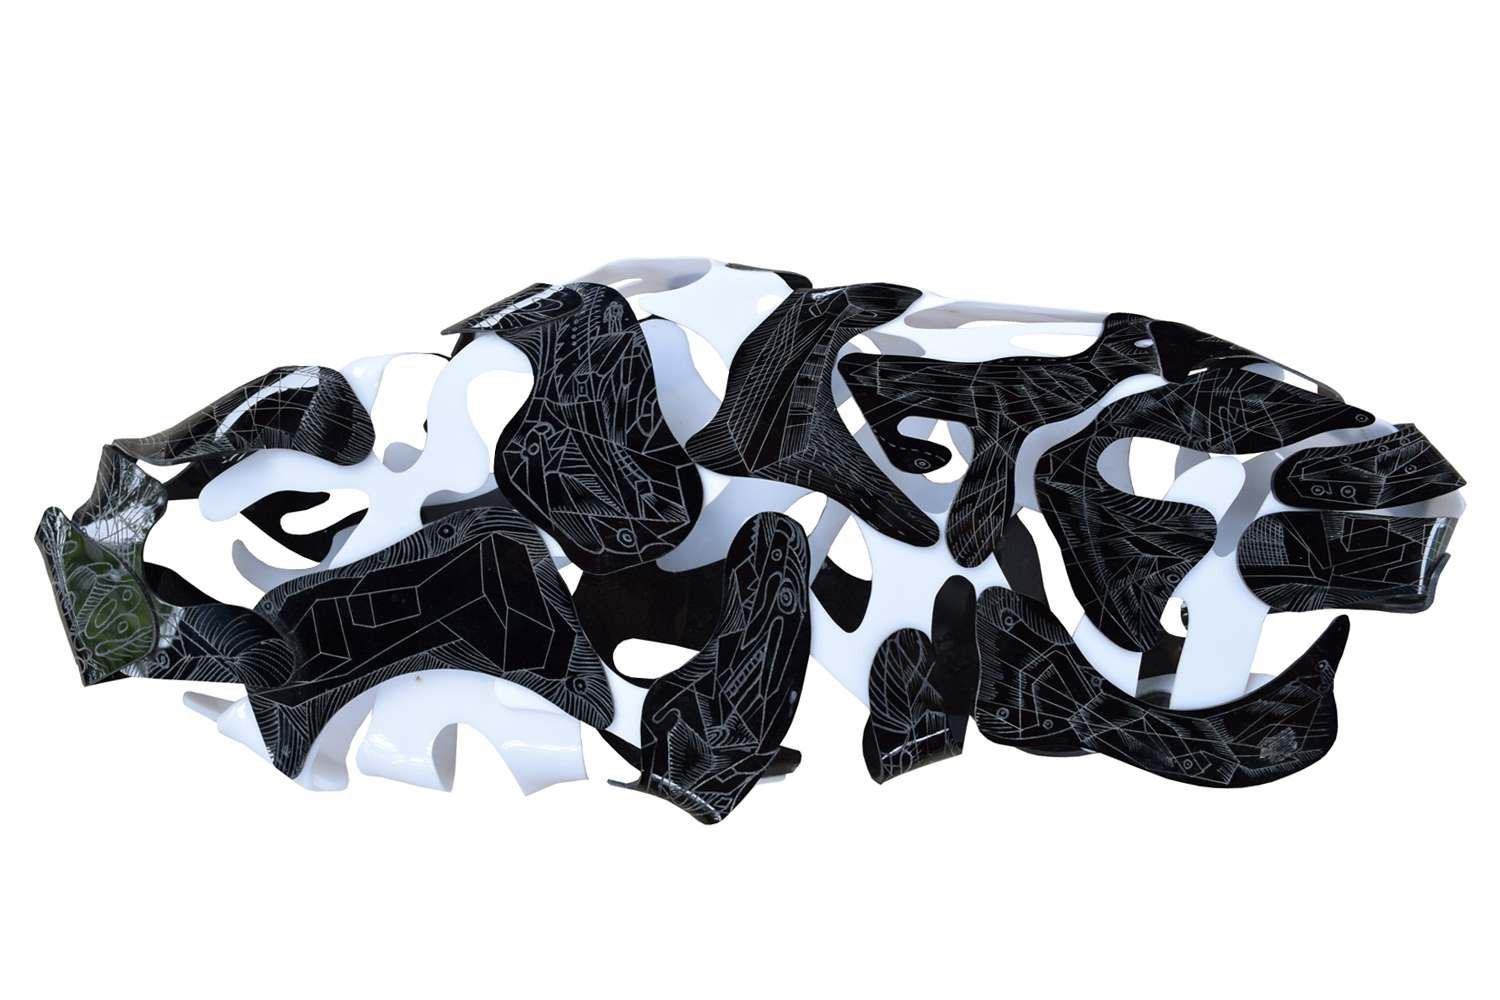 Symbio is a black and white plexiglass sculpture from symbiosis light sculptures series by Marko Gavrilovic